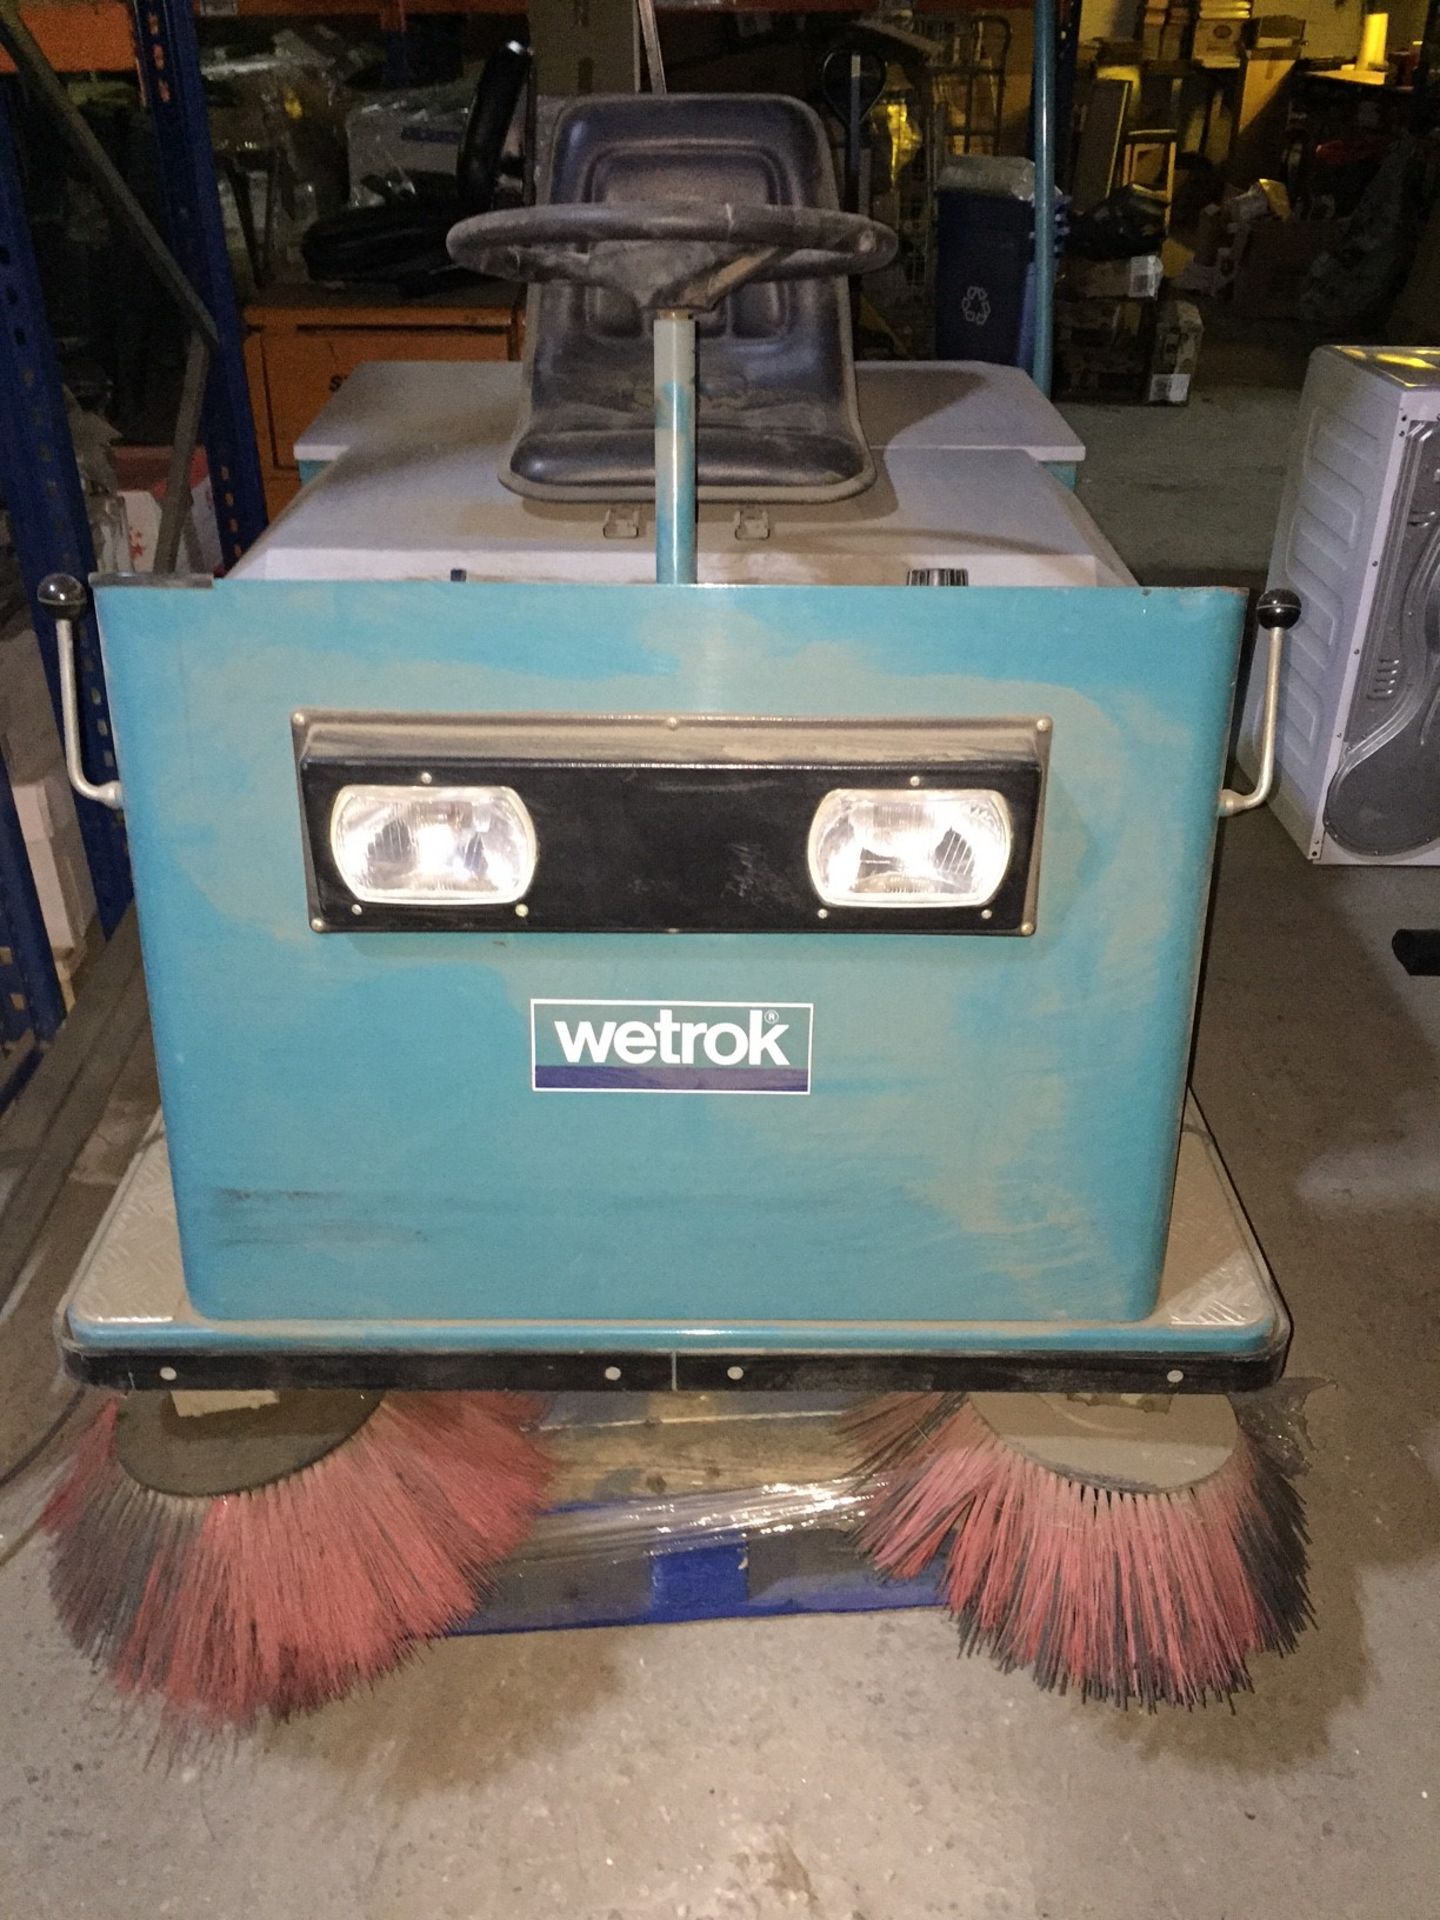 Wetrok Commercial Ride-On Floor Cleaning/Sweeping Machine - Complete With Charger and Key